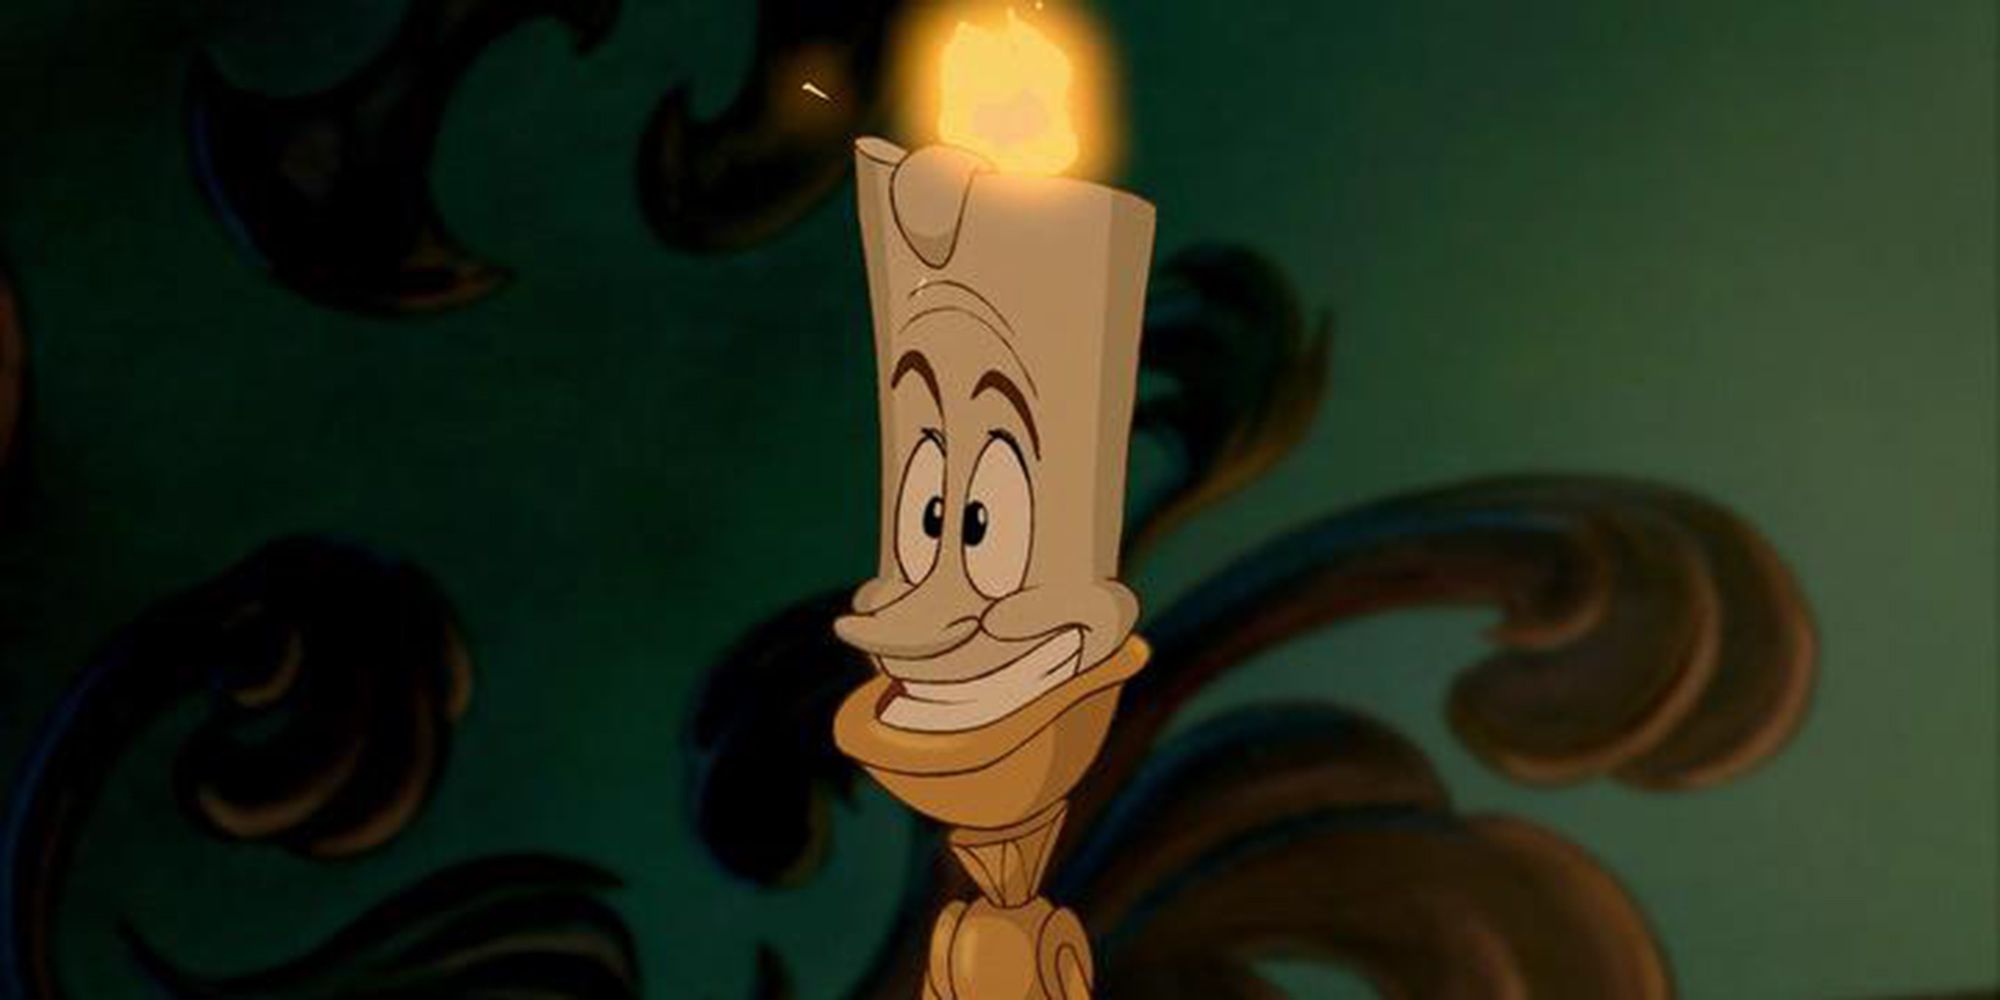 Lumiere from Beauty And The Beast